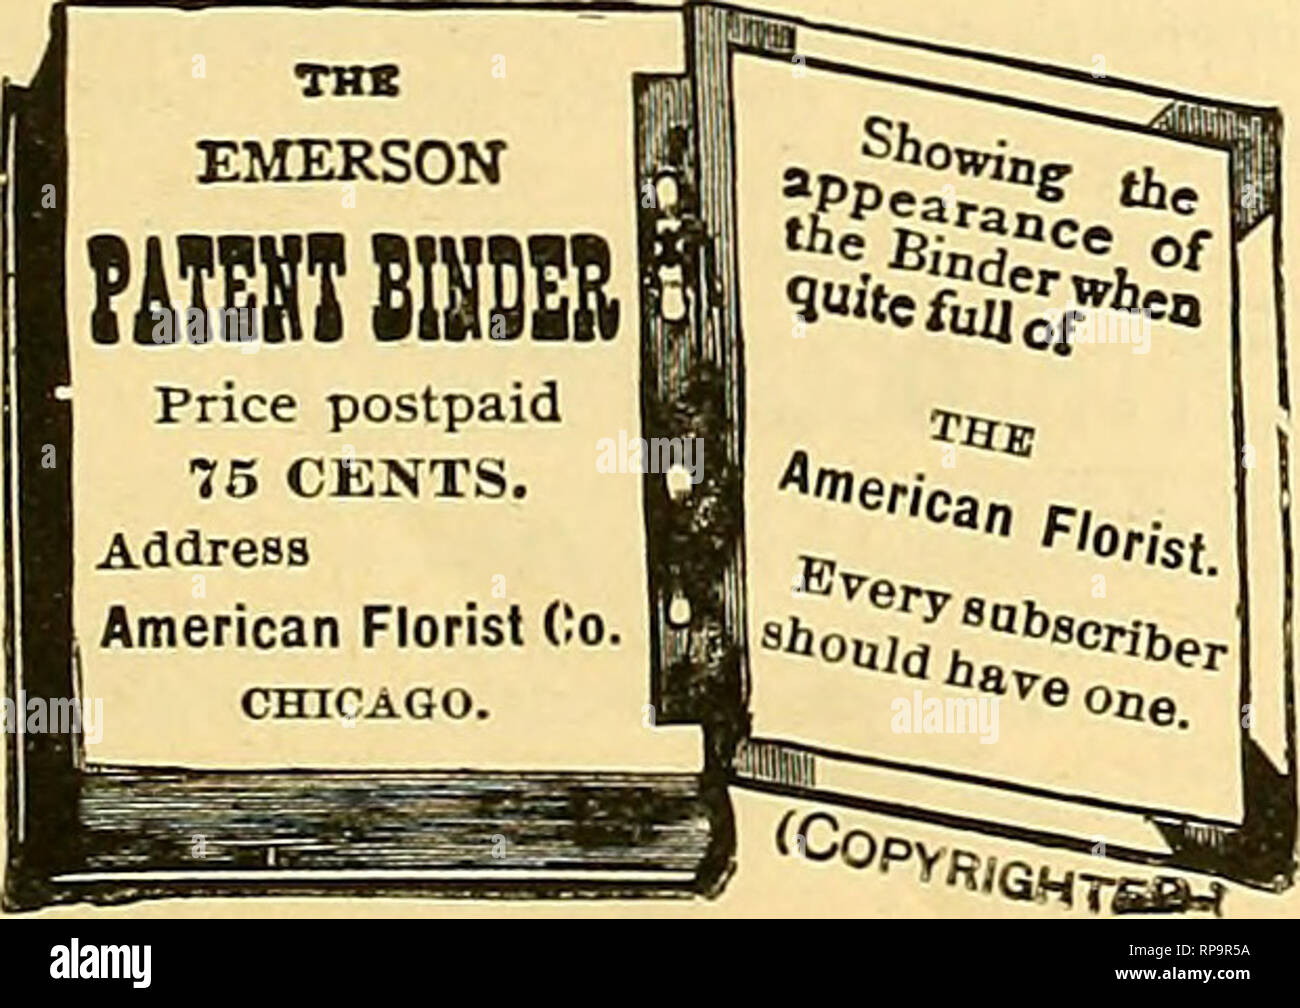 . The American florist : a weekly journal for the trade. Floriculture; Florists. IMPORTED ORCHIDS. Cattleya Mossiae just arrived in splendid condition. East Indian 0 chlds have arrived. Among them will be a grand lot of Vanda Coerulea, Cypripedium Insigne, collected in the original district from which all the choicest varieties have come, Cymbidium Eburneum, C. Masters!!, C. Devonianum, C. Glgan- teum. Also Dendrobium Nobile. D. Farmersii. D. Chrysotoxum, D. Thyrsiflorum. 0. Aureutn, D. Densiflorum. D. Devonianum, D. Cambridgea'um and other Dendrobes, together with a small lot of Phajus Wallic Stock Photo